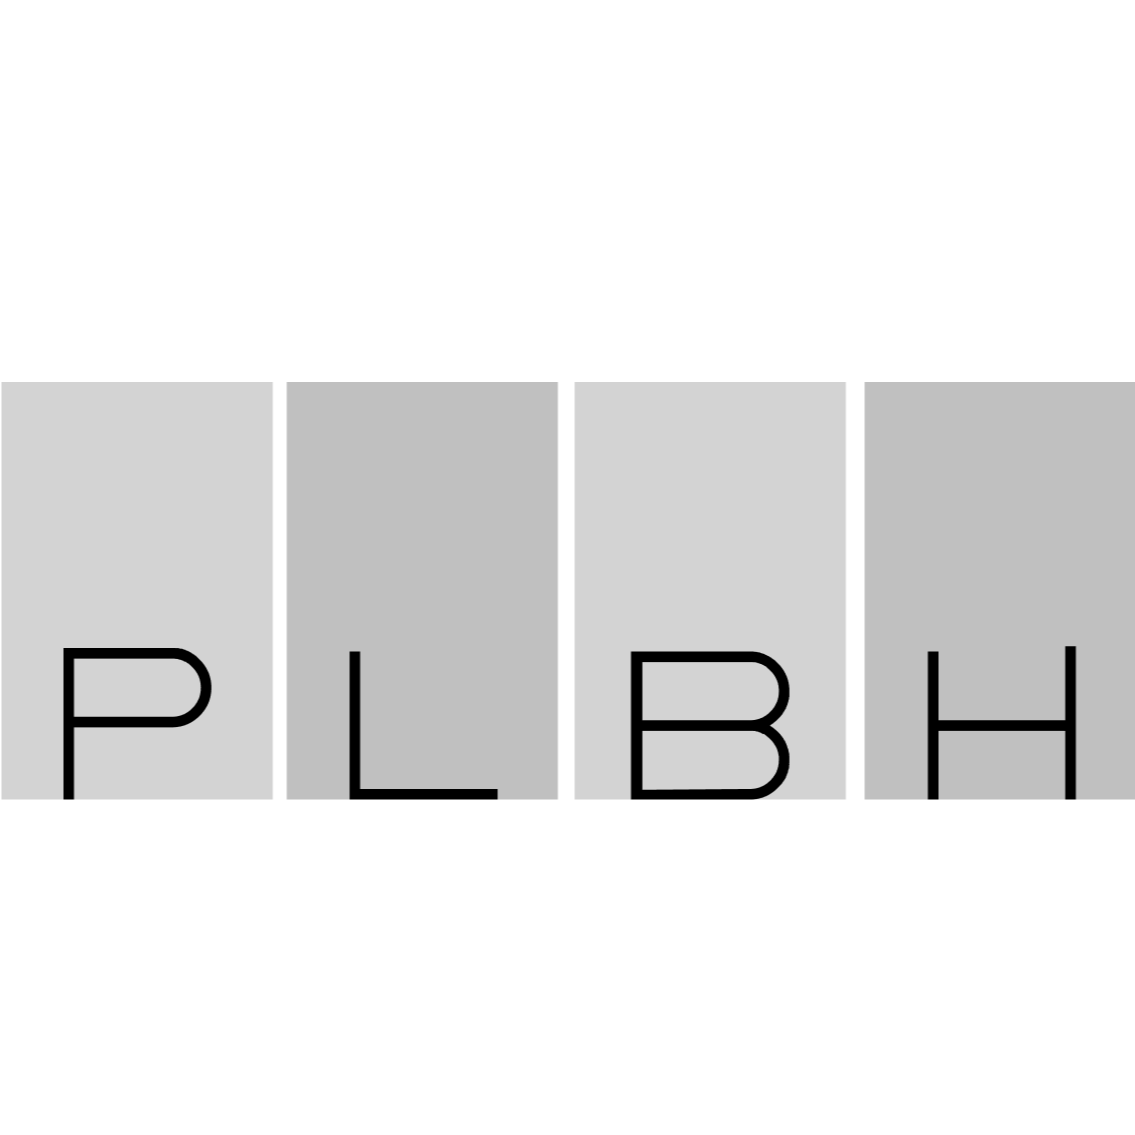 PLBH - Law Offices of Perona, Langer, Beck, and Harrison - Long Beach, CA 90807 - (800)435-7542 | ShowMeLocal.com